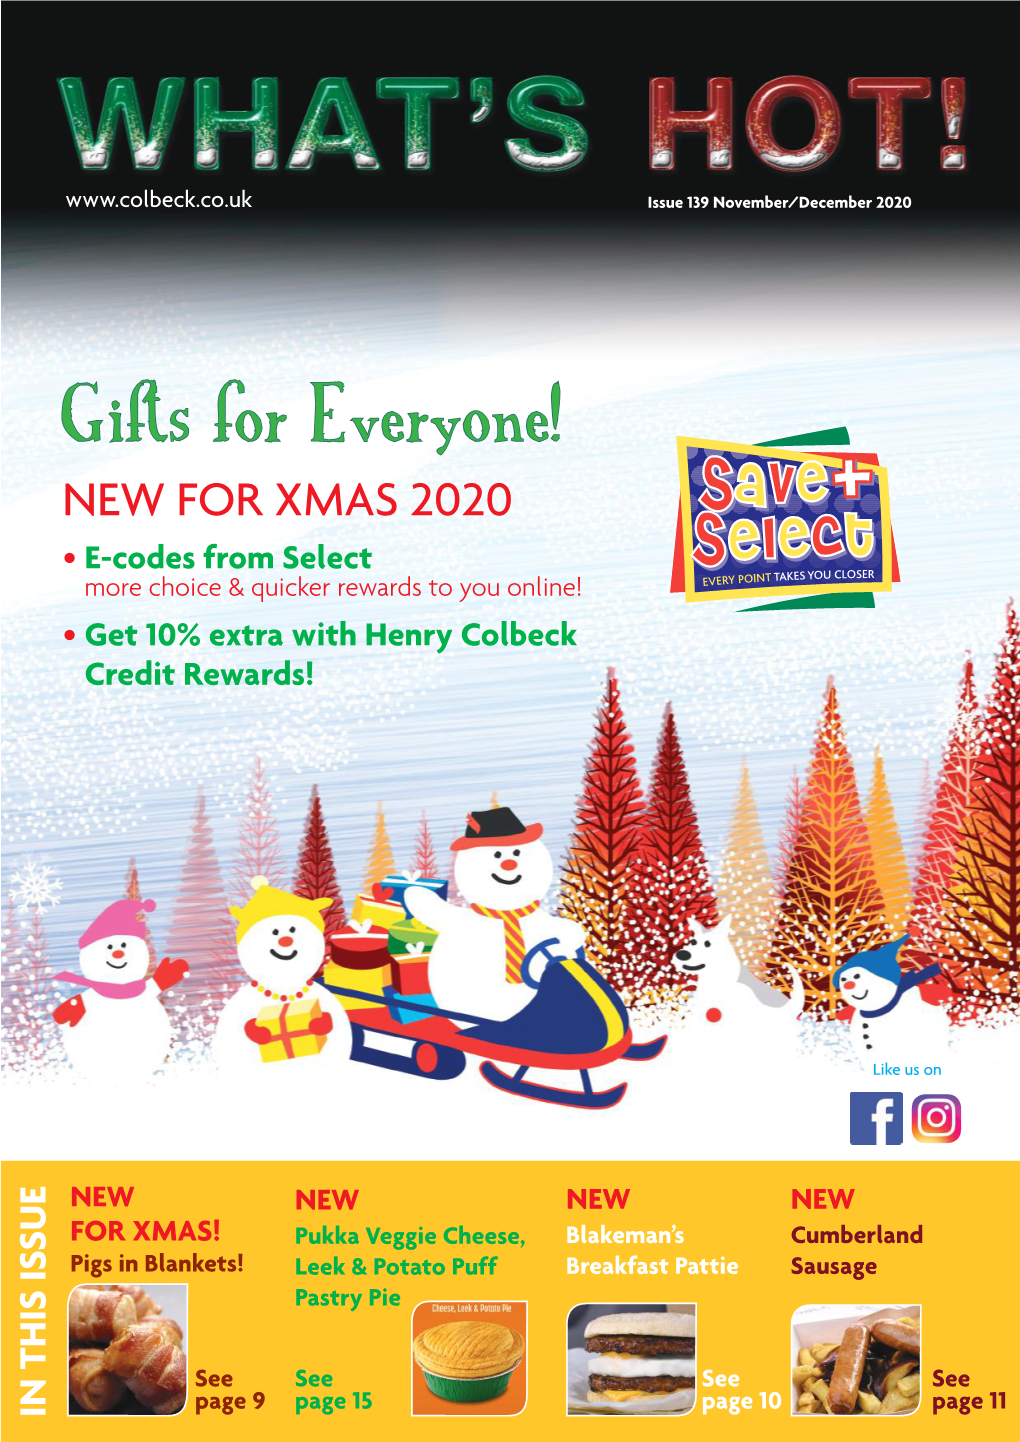 Gifts for Everyone! NEW for XMAS 2020 • E-Codes from Select More Choice & Quicker Rewards to You Online! • Get 10% Extra with Henry Colbeck Credit Rewards!